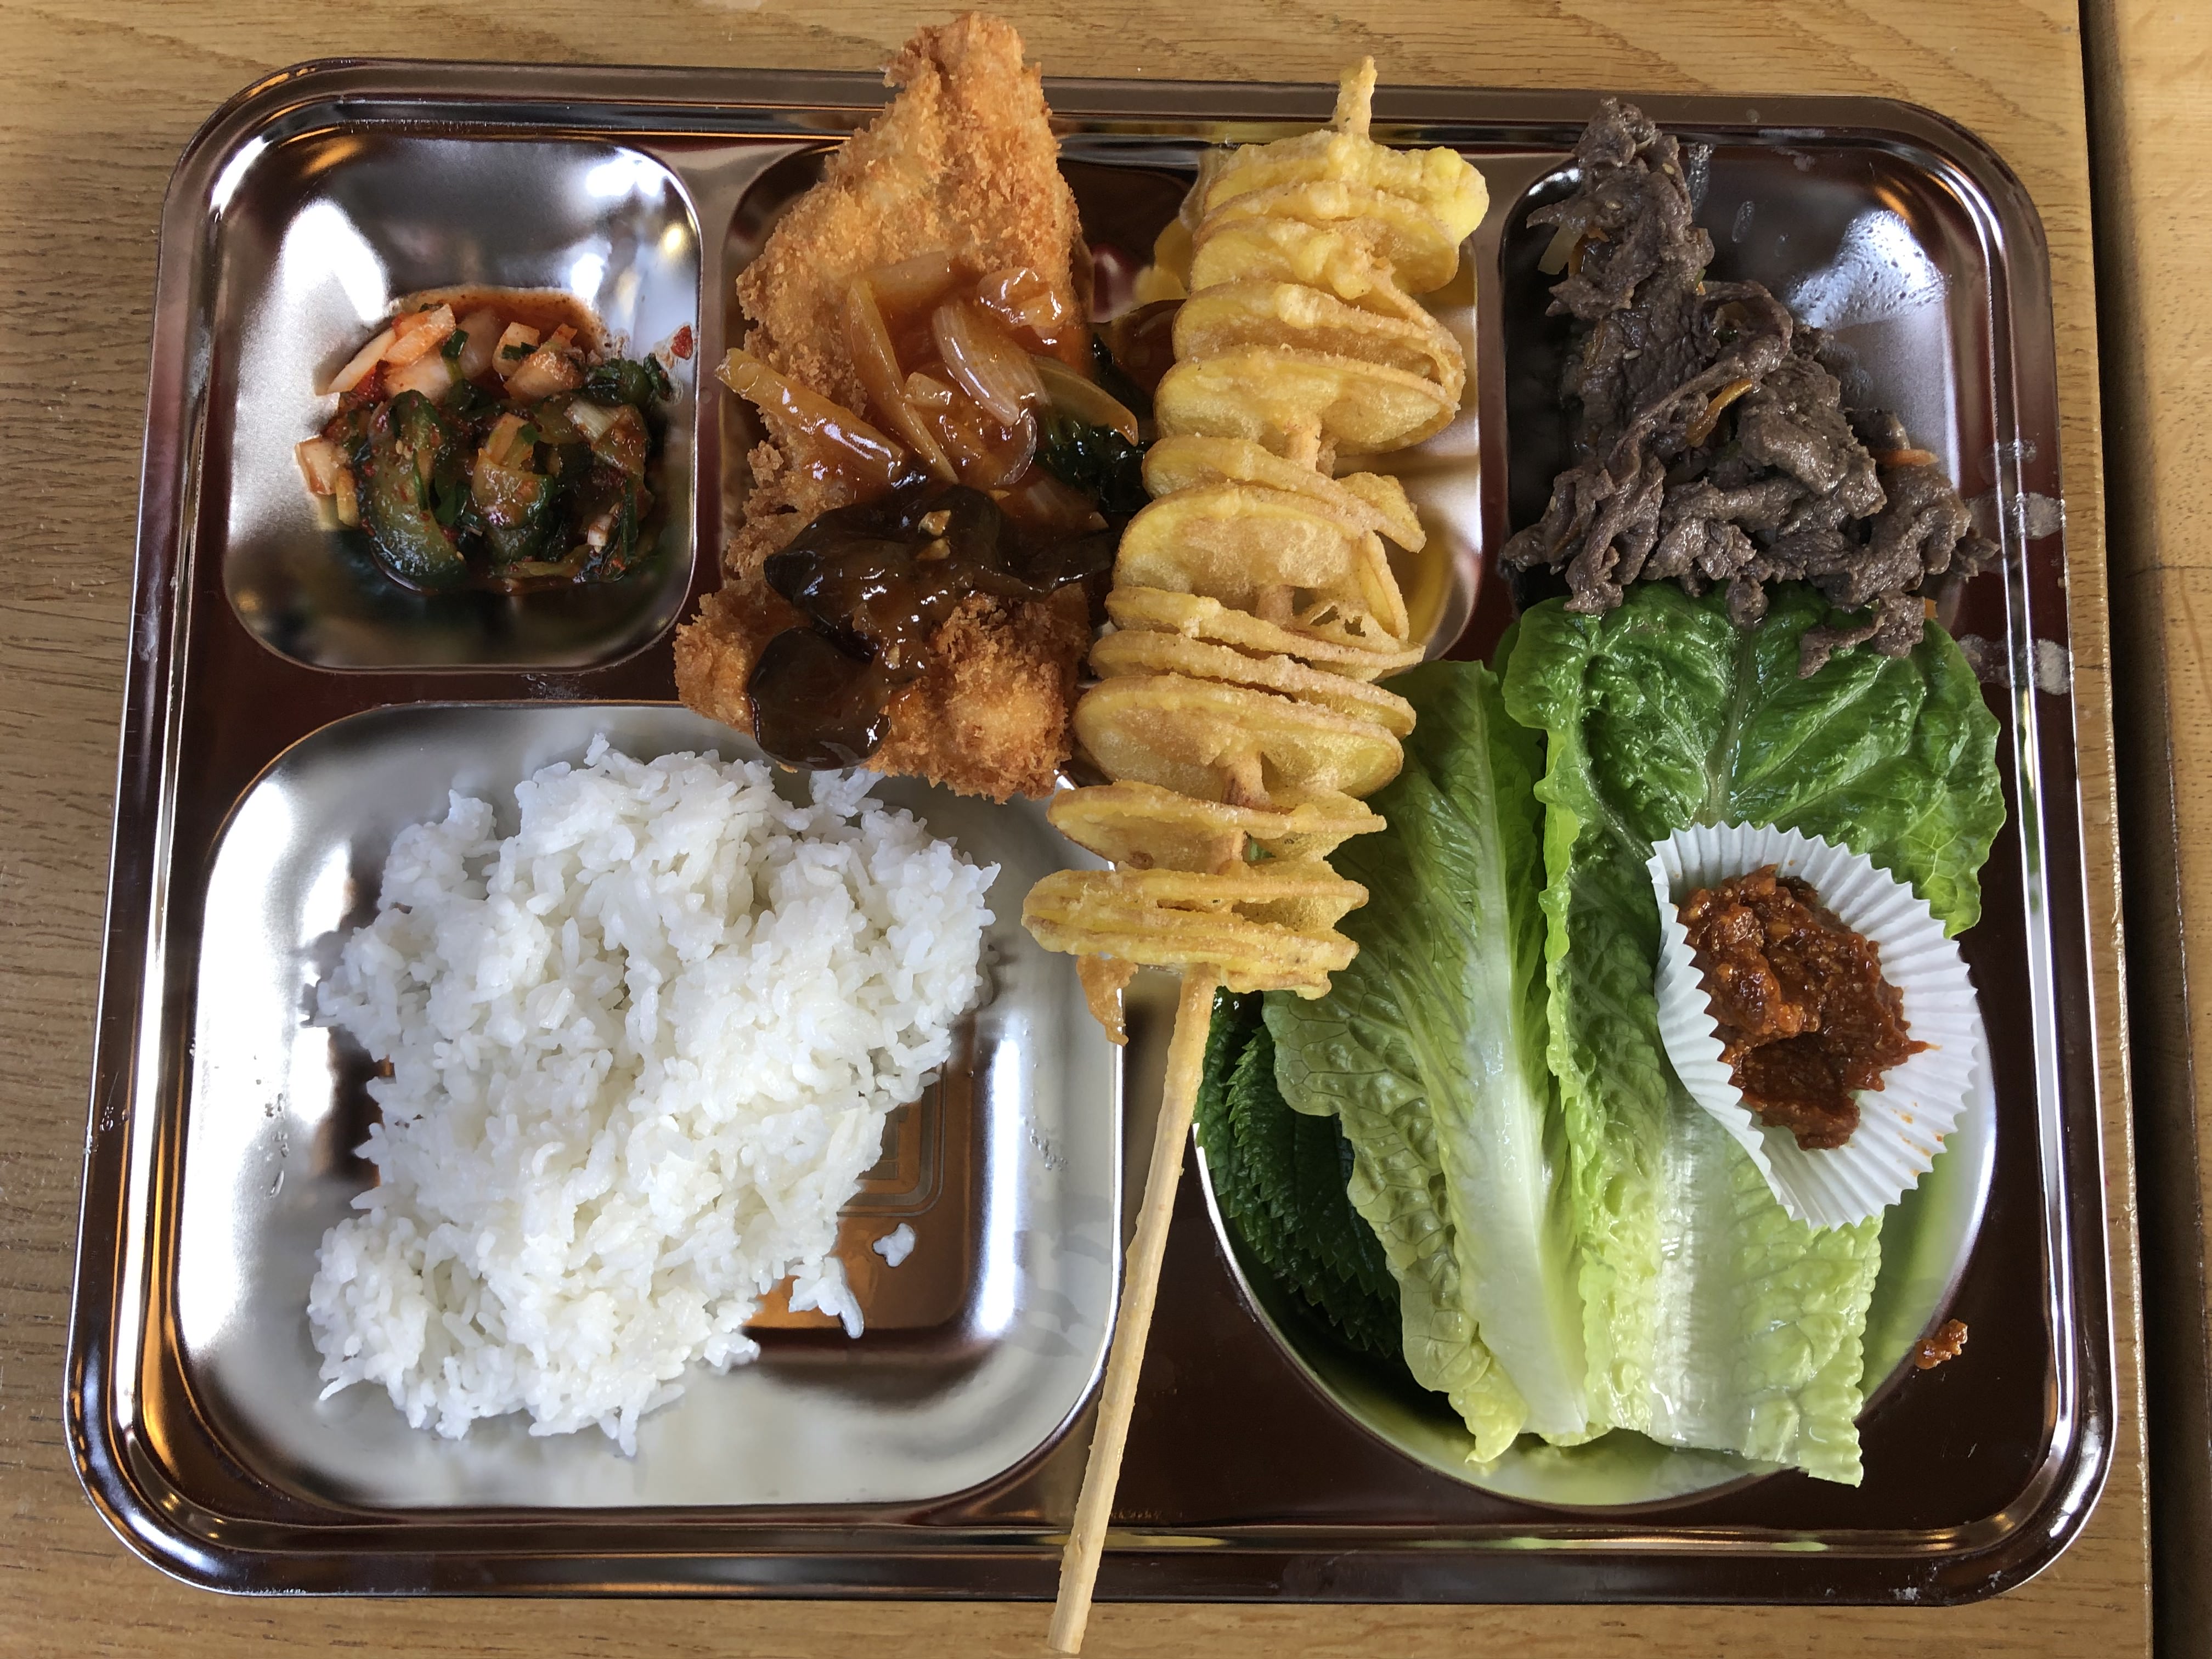 A shiny metal food tray with a selection of korean food, including rice, meat and a skewer with fried potatoes